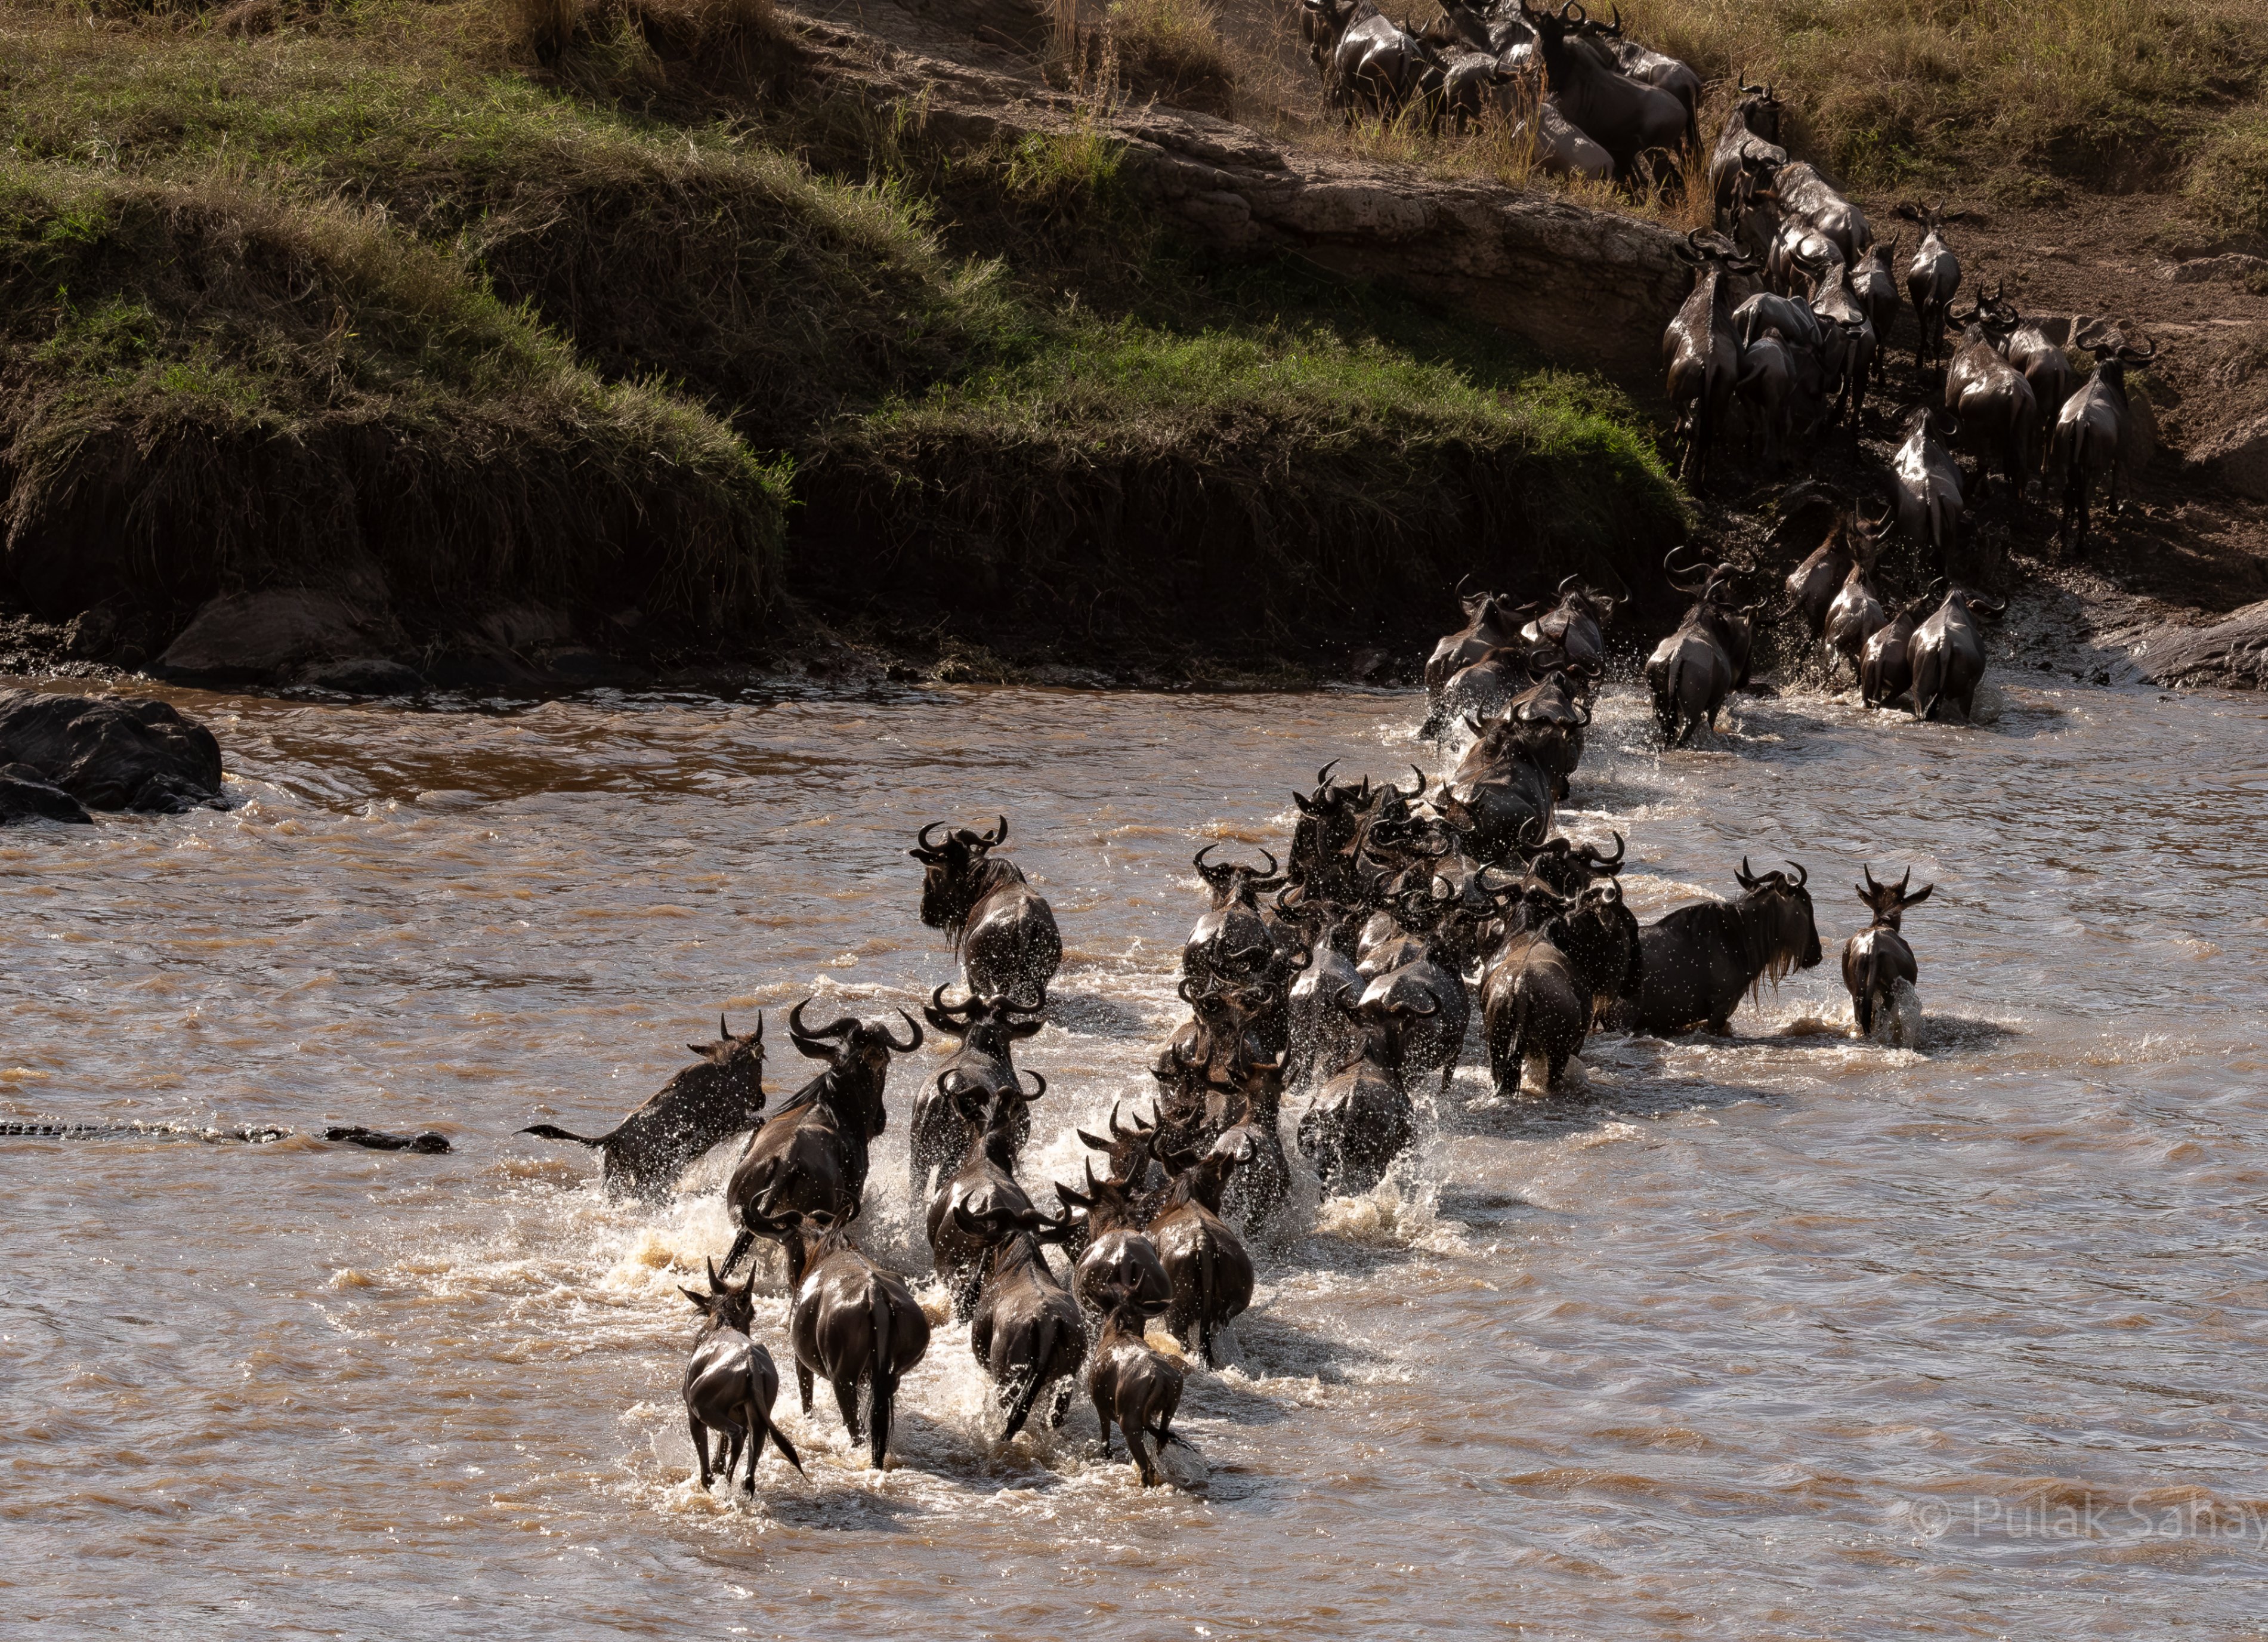  Wildebeest spooked by crocodile